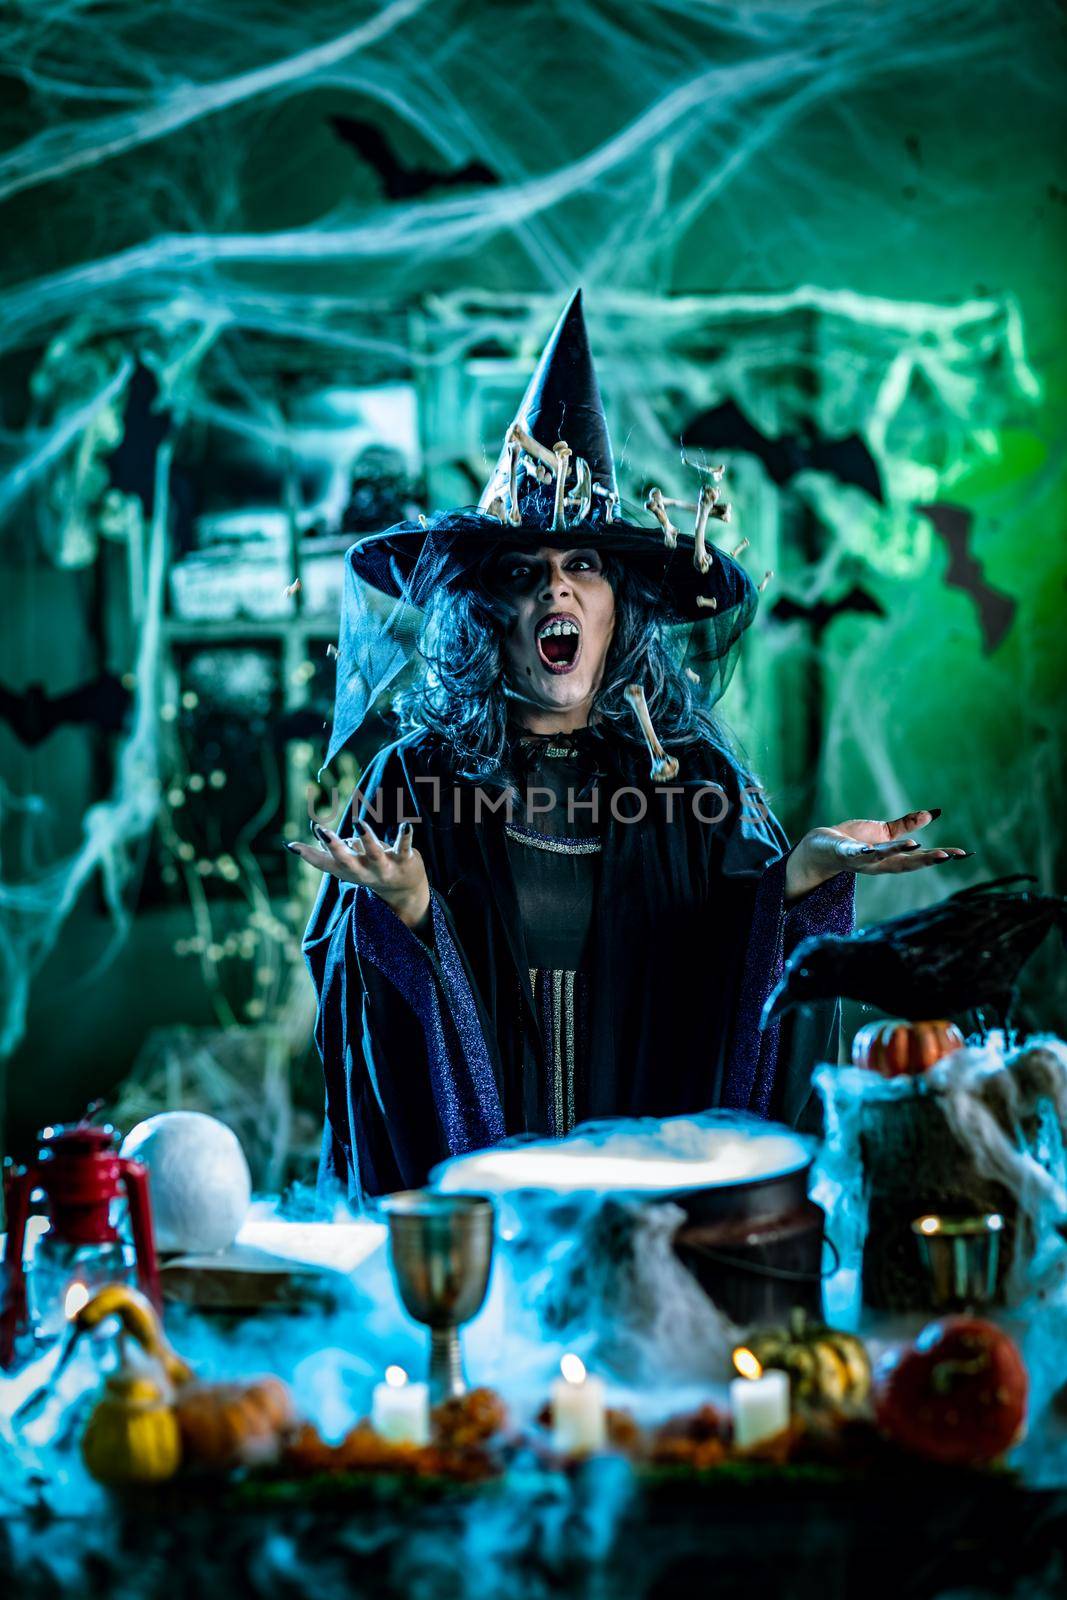 Witch with awfully face in creepy surroundings and smoky green background talks magic words to bones around her hat, above boiling cauldron. Halloween concept.